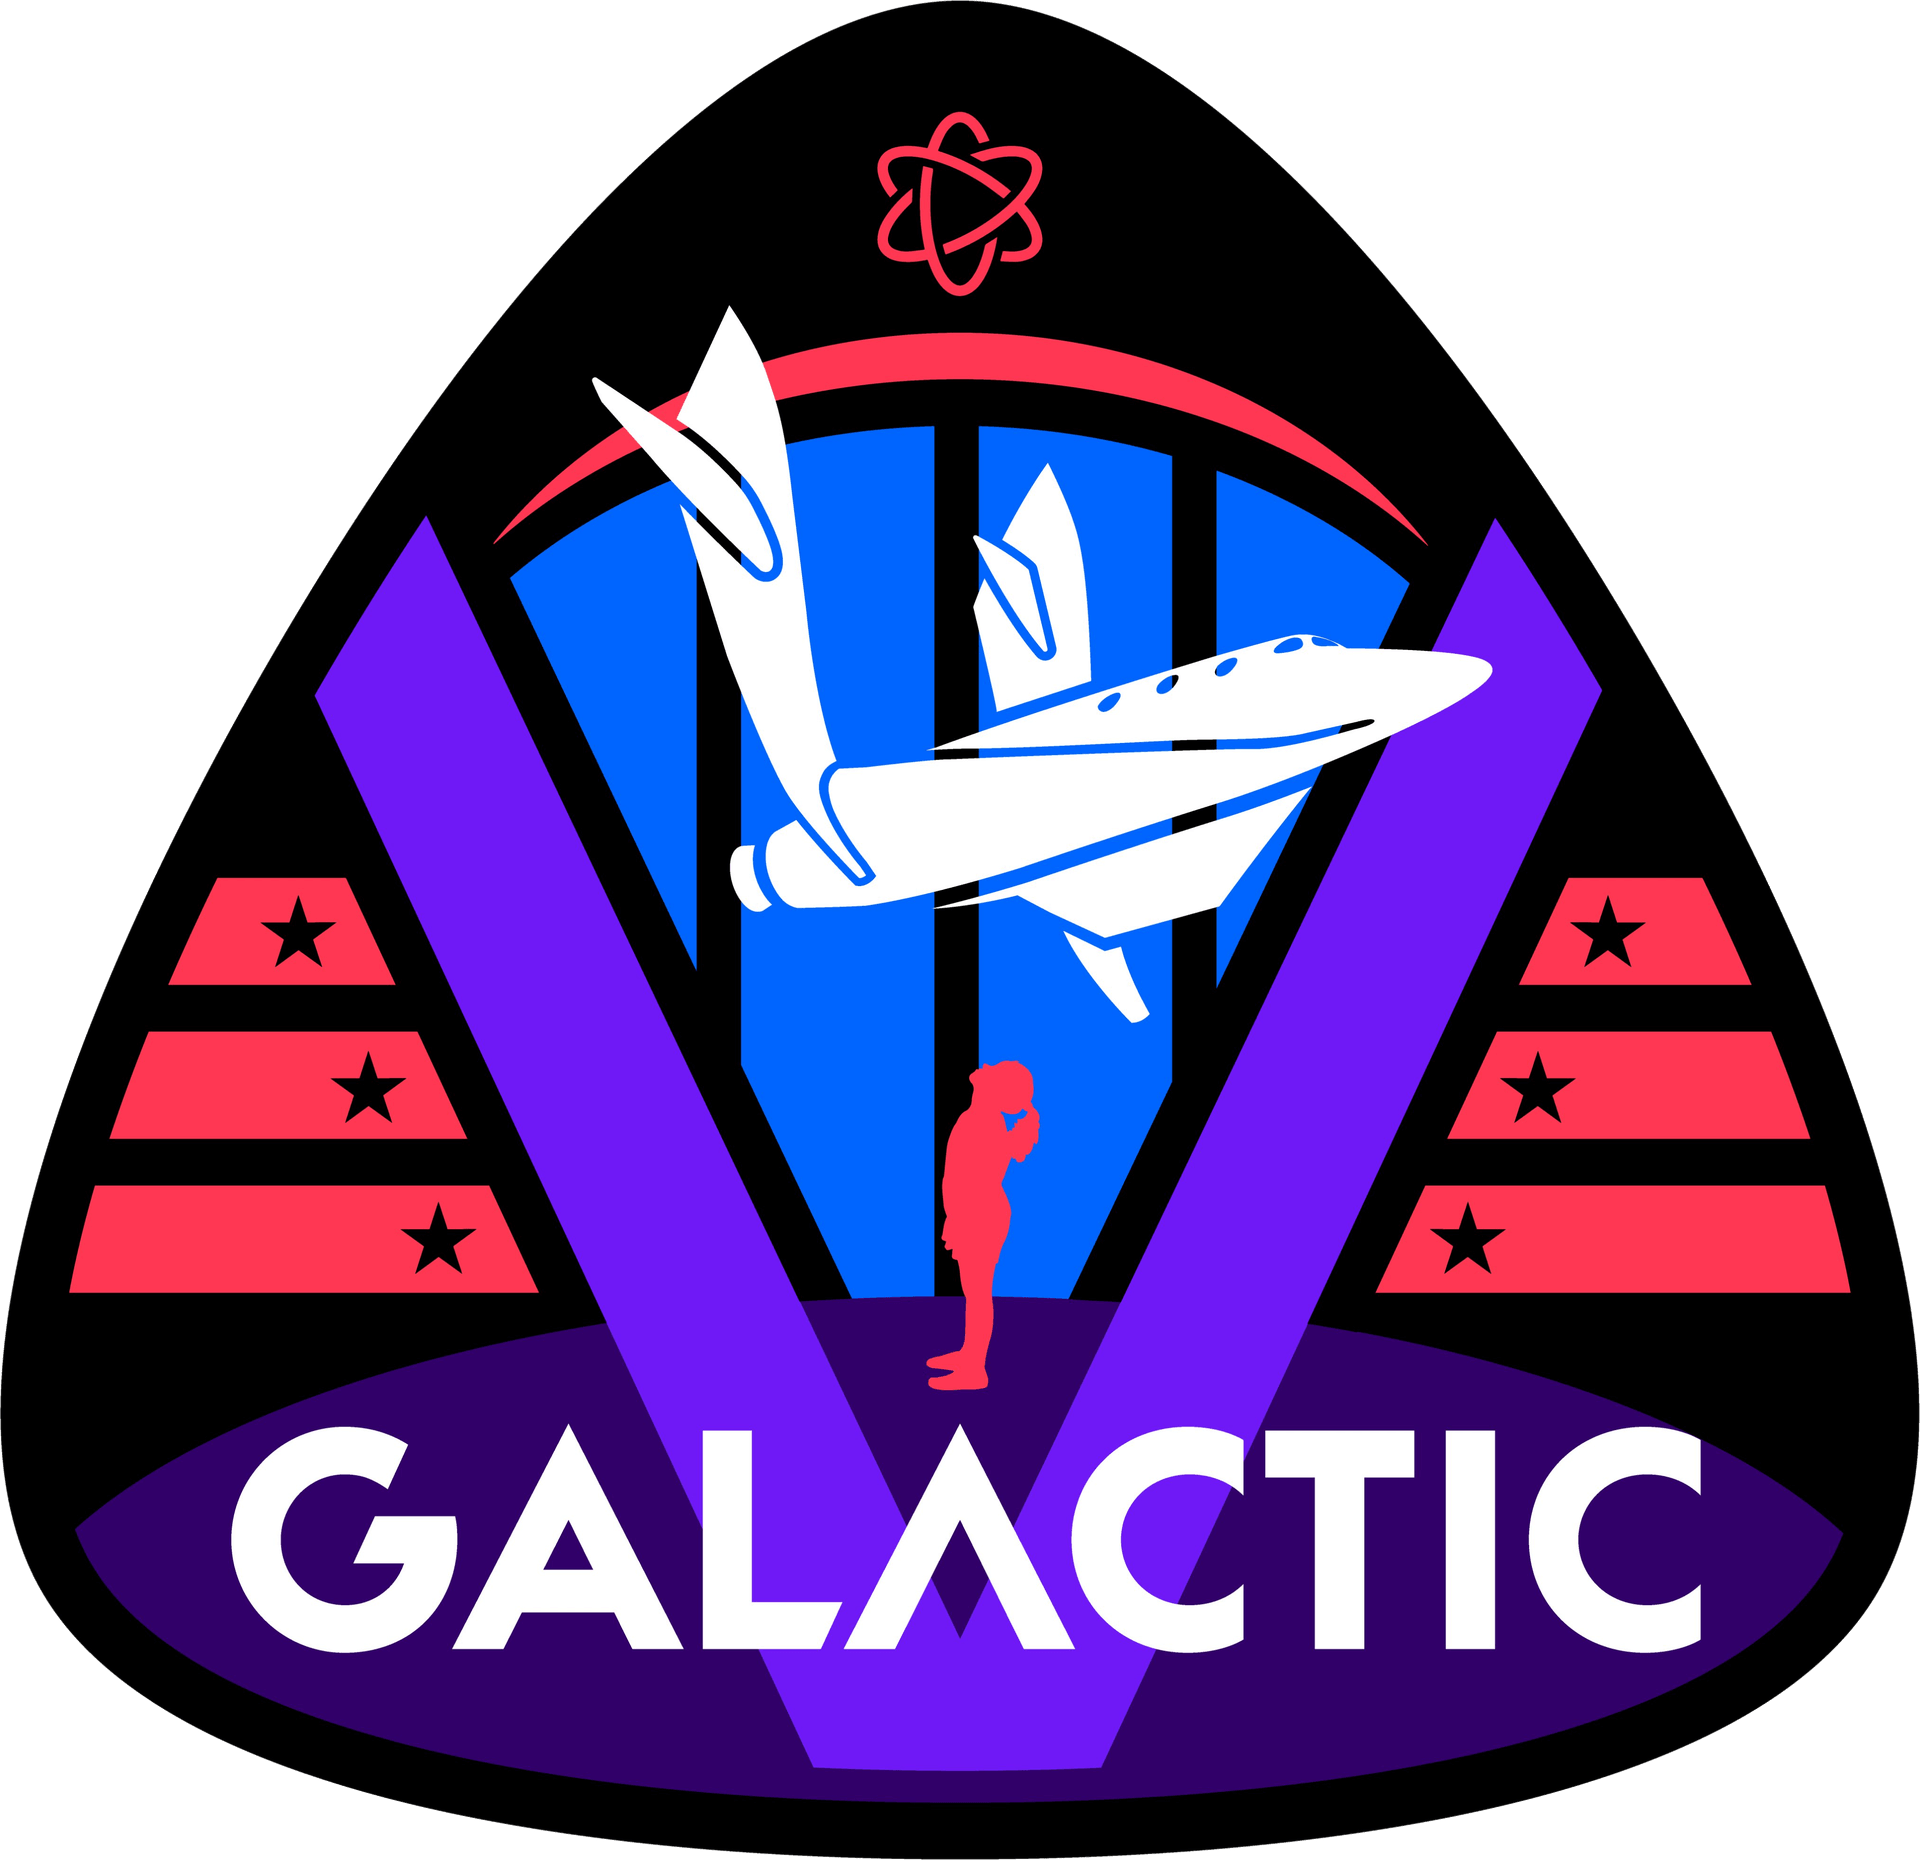 Mission patch for Galactic 05